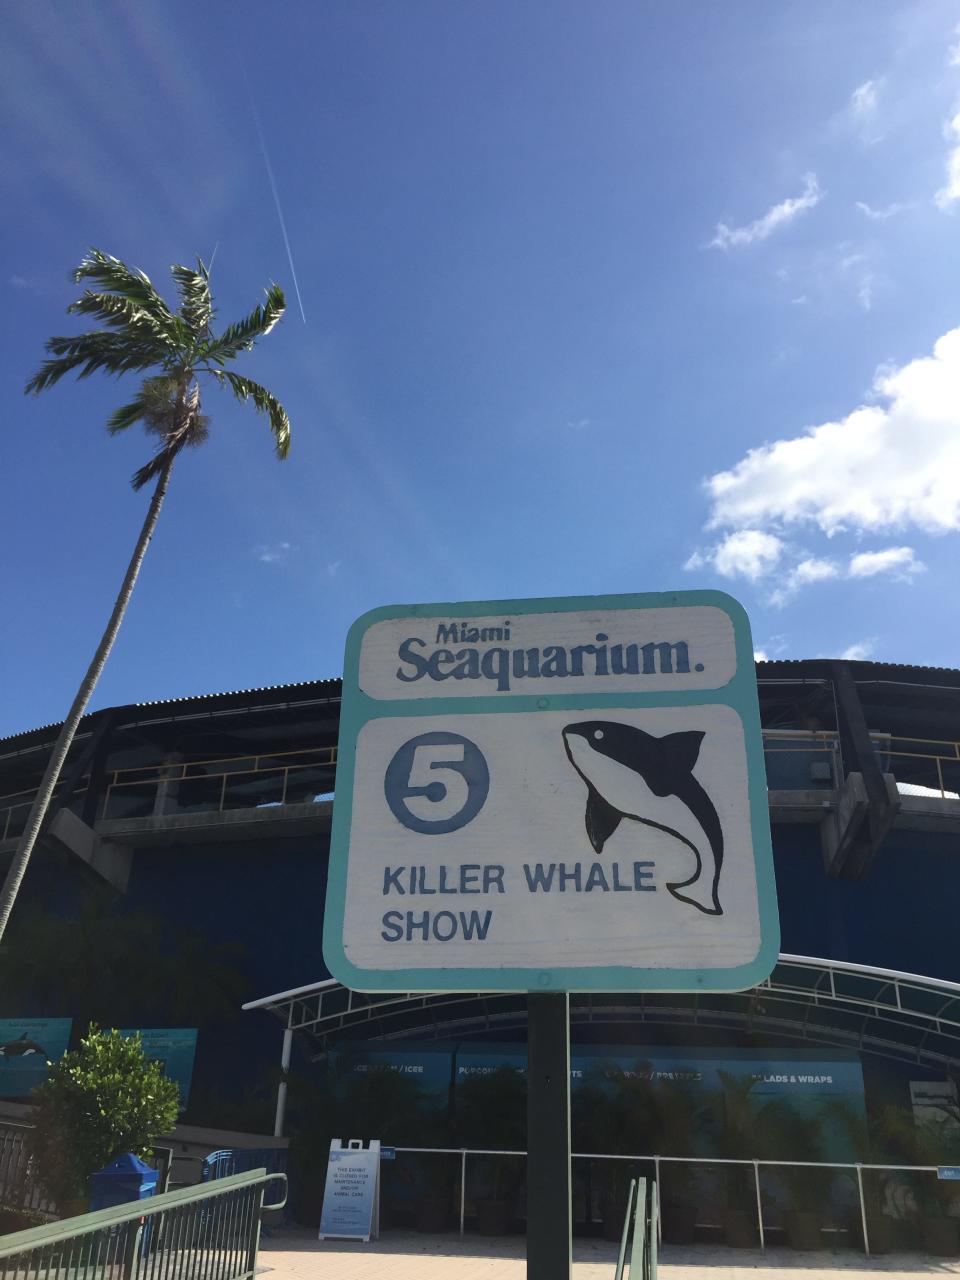 A sign advertises the parks killer whale show